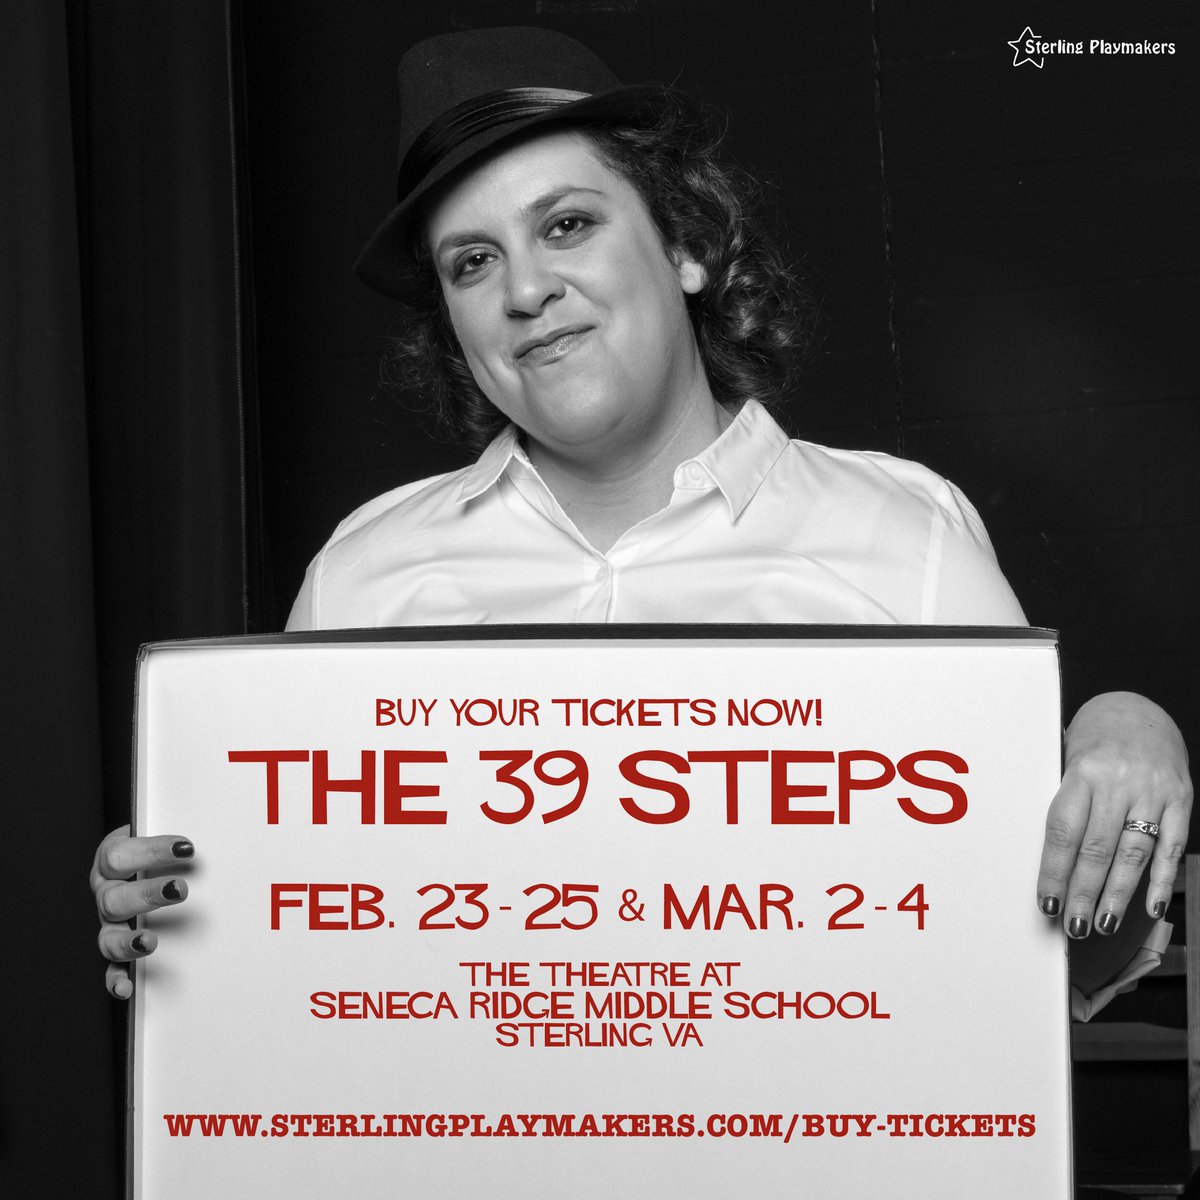 Coming Friday to a stage near you! #the39steps #sterlingplaymakers #buyticketsnow #communitytheatre #localtheatre #theatre #actor #comedy #localentertainment #localfun #supportlocal #sterlingva #loudouncountyva pc: paulonline.com